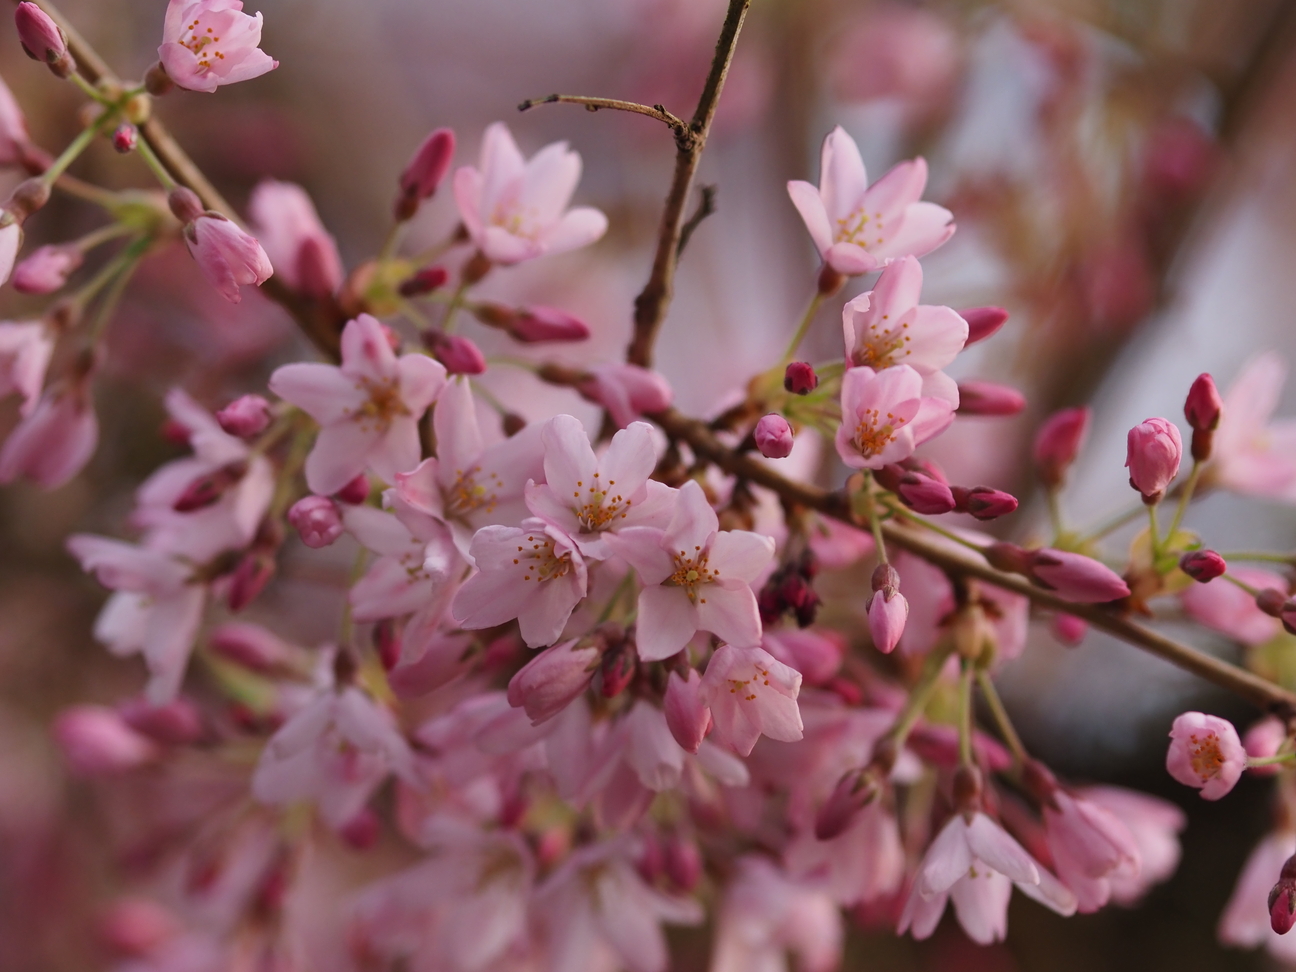 Blossoms at Eastertide